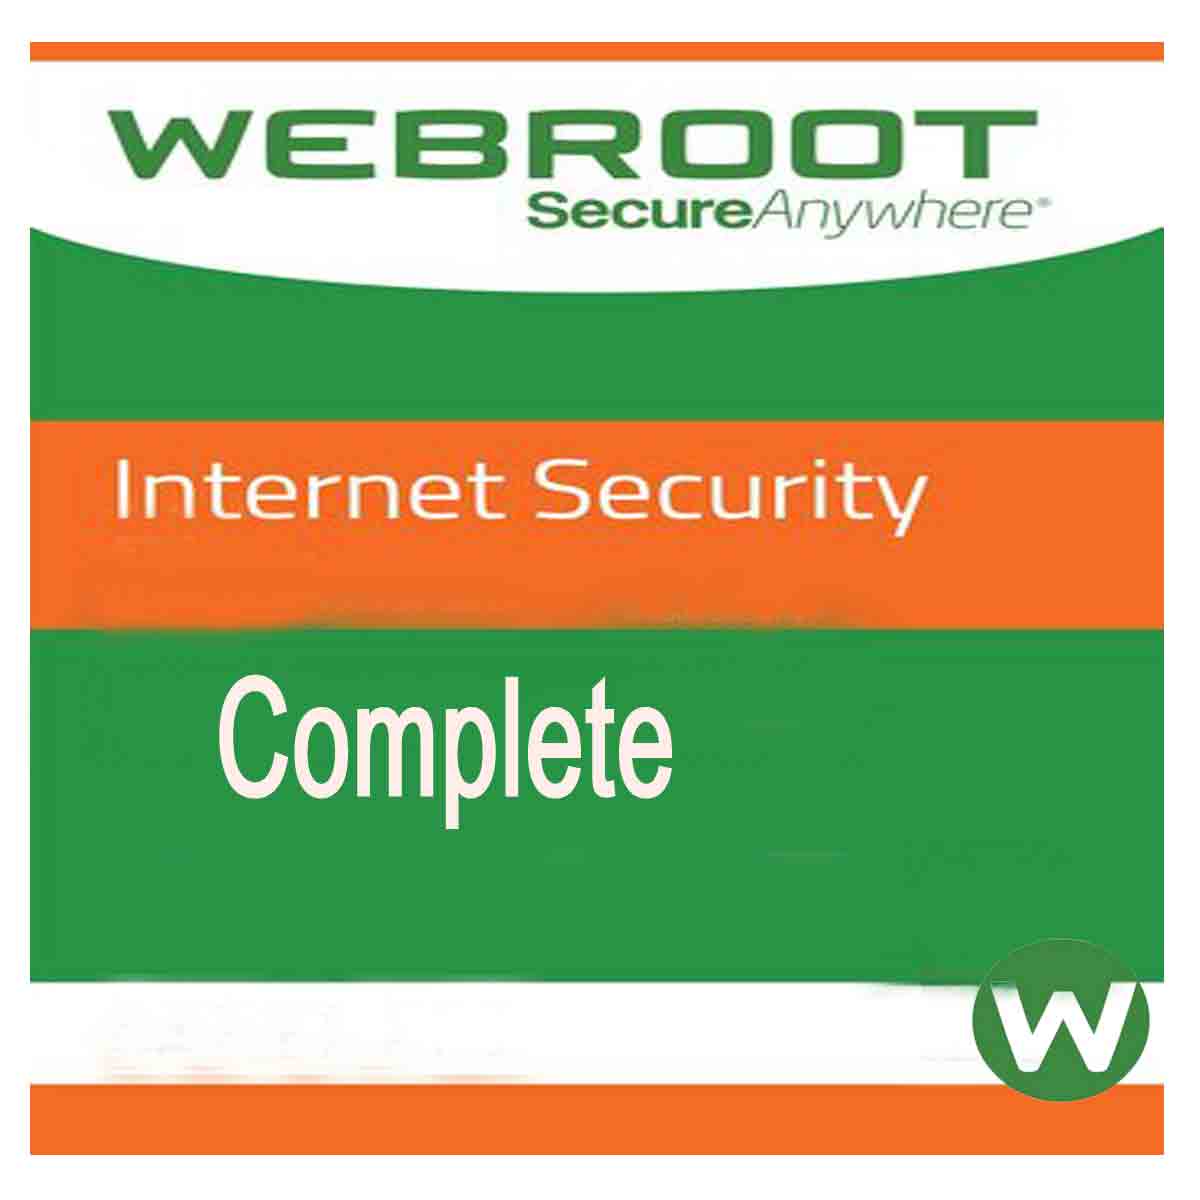 Webroot SecureAnywhere Internet Security Complete License Key - 0800-090-3222